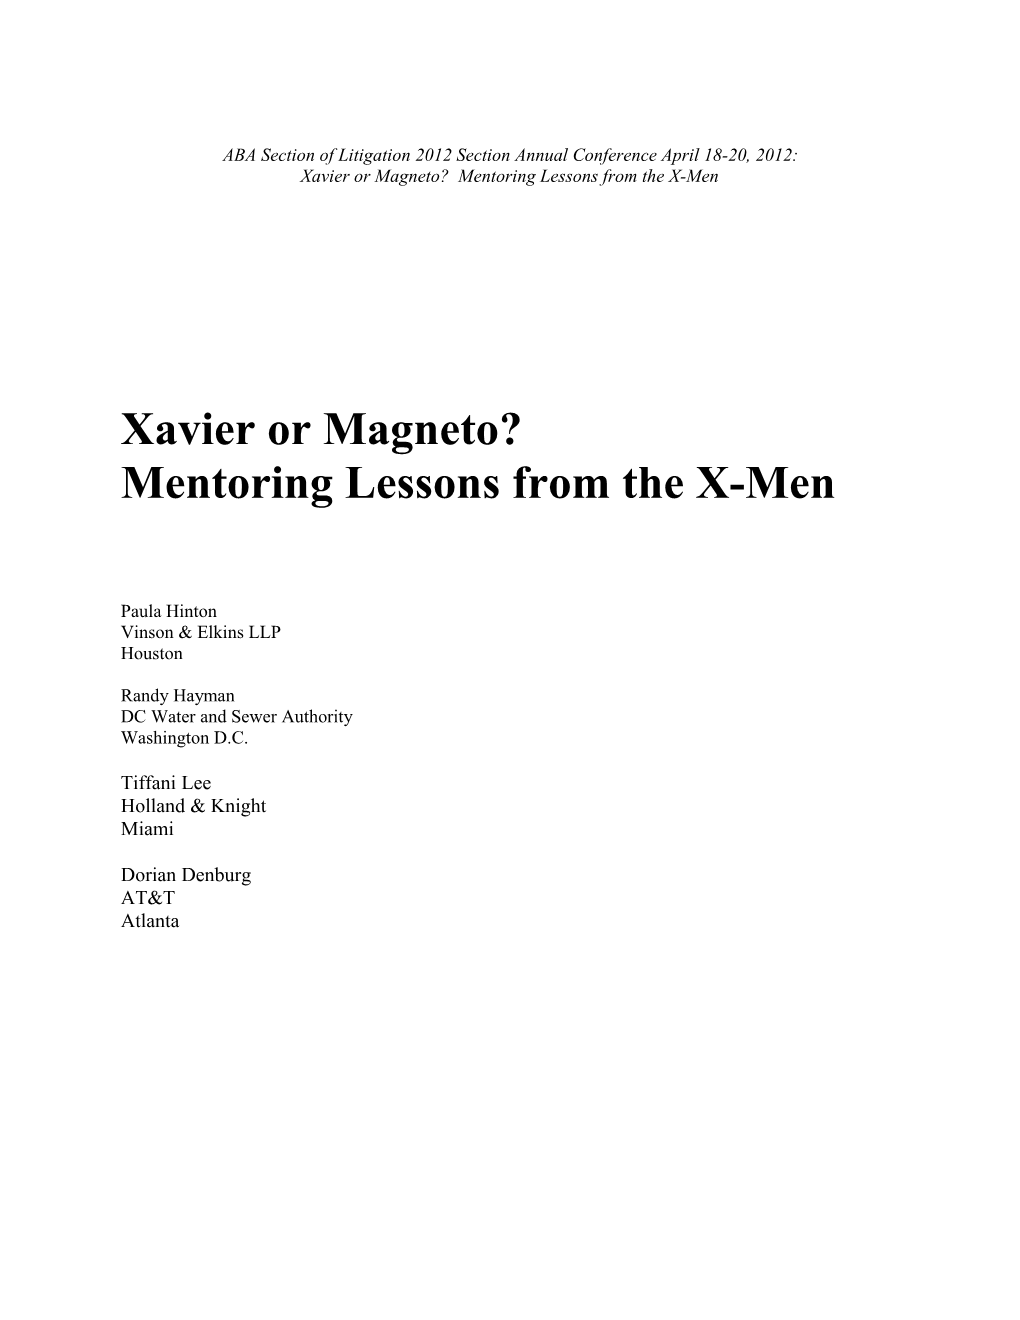 Xavier Or Magneto? Mentoring Lessons from the X-Men